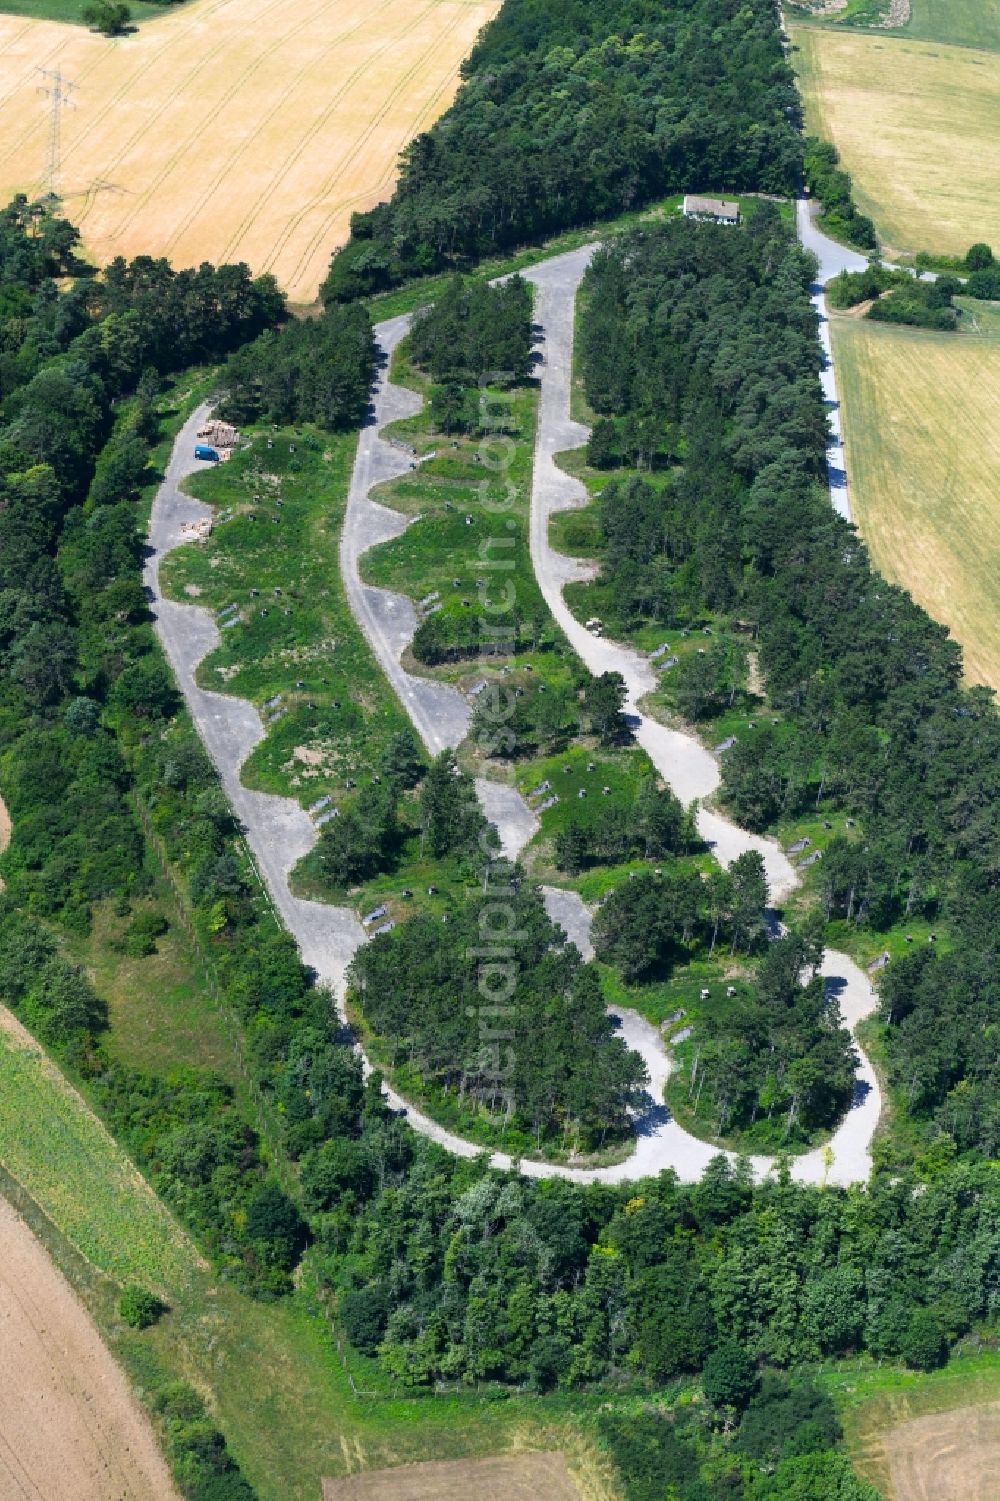 Aerial image Tauberbischofsheim - Vacant bunker complex and ammunition depots on the former military training ground near Tauberbischofsheim in the state Baden-Wurttemberg, Germany